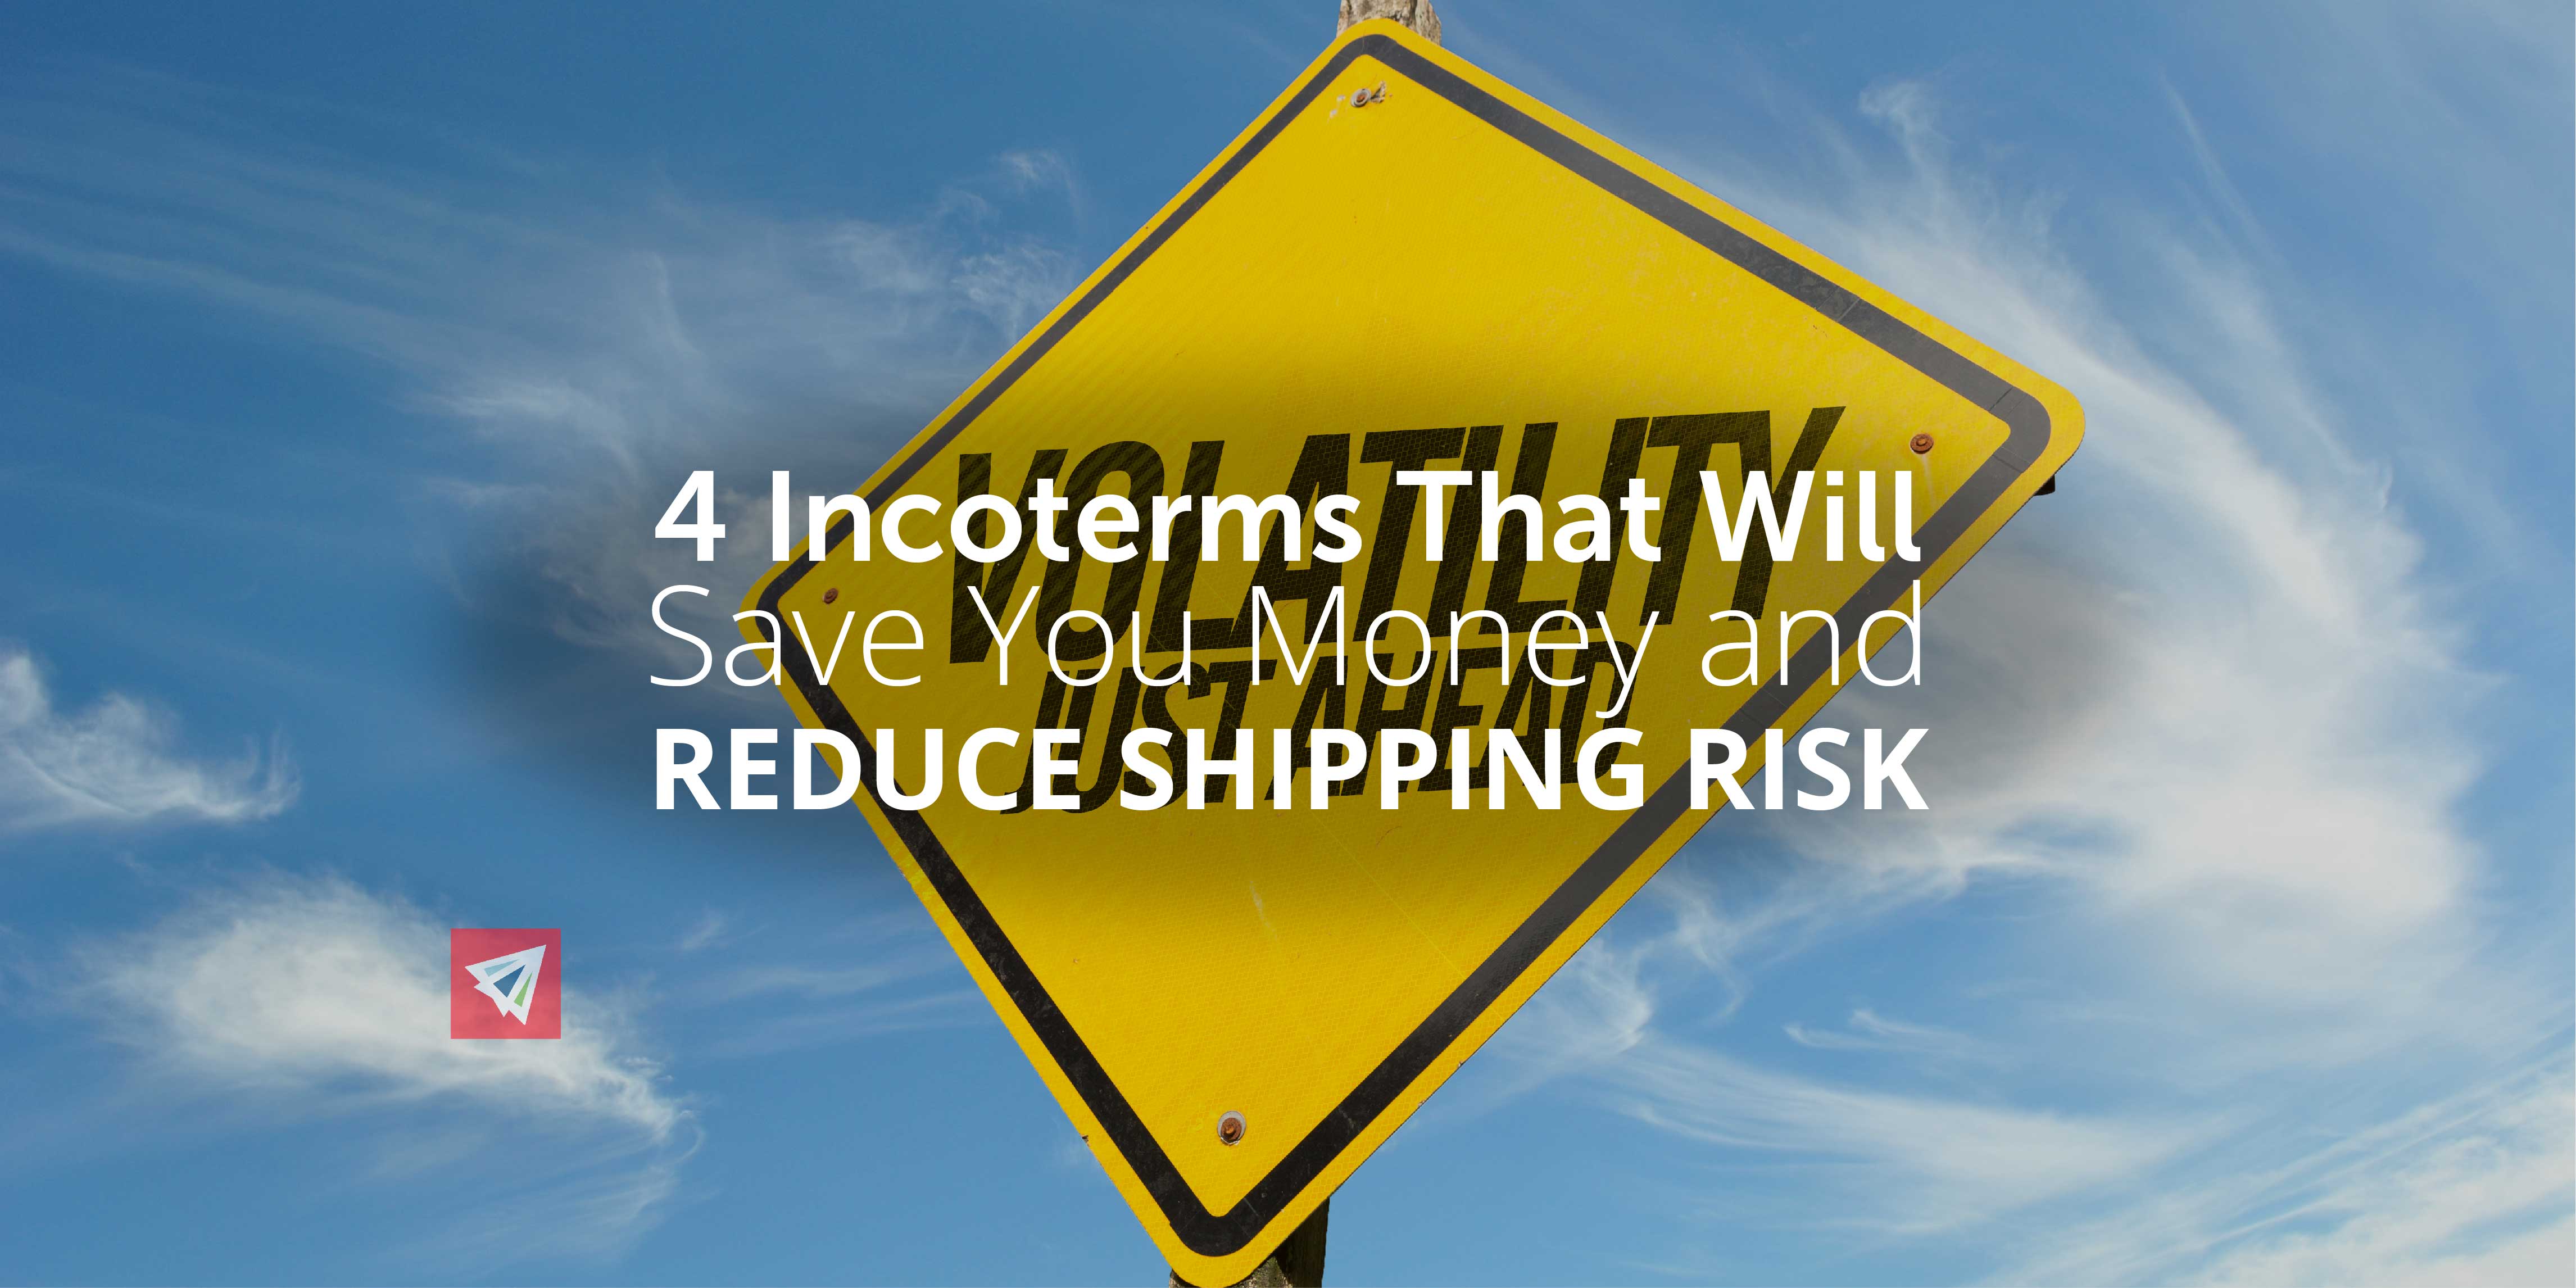 4 Incoterms That Will Save You Money and Reduce Shipping Risk